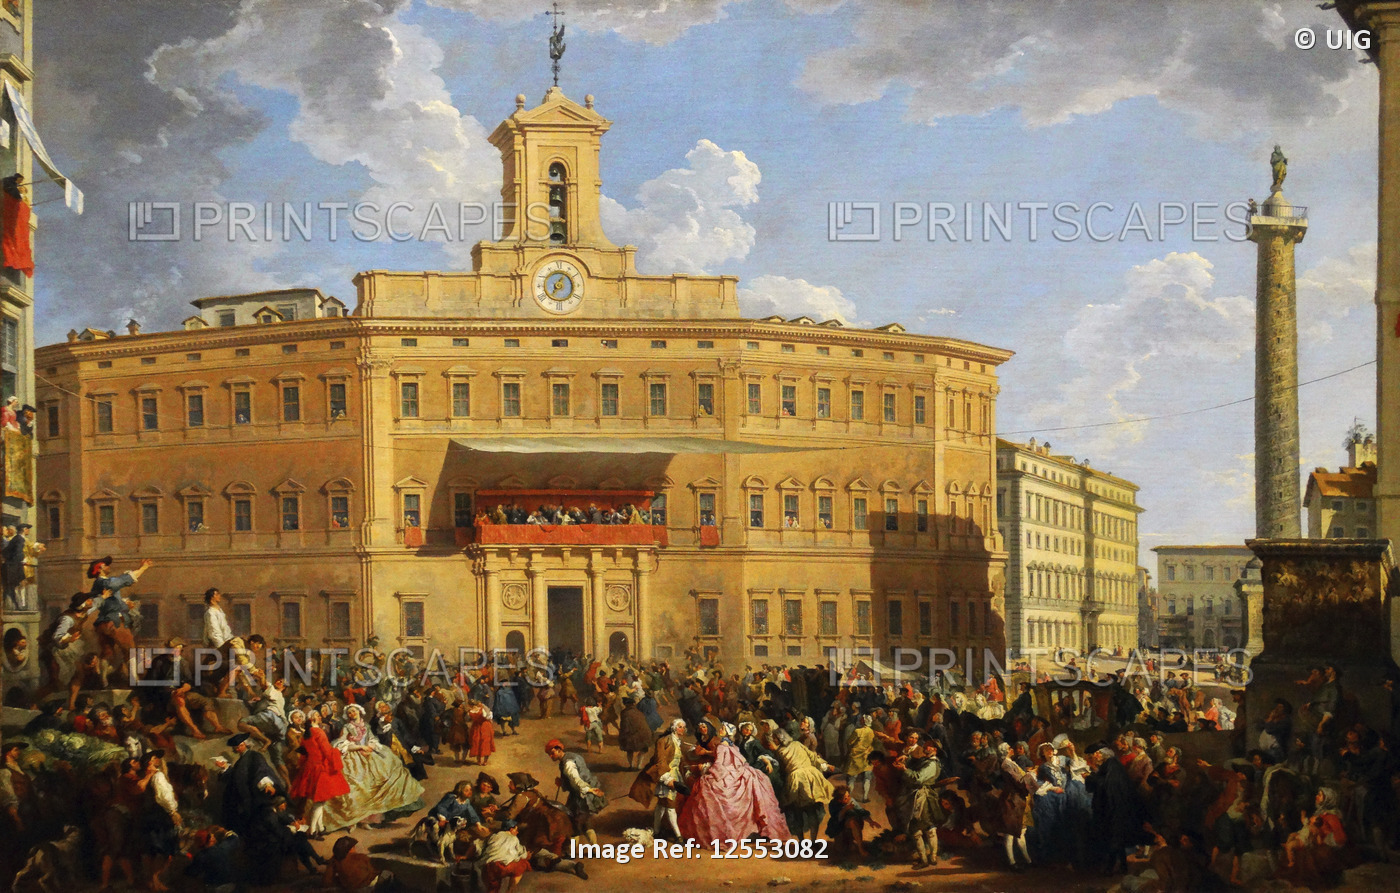 Painting titled 'The Lottery in Piazza di Montecitorio' by Giovanni Paolo Panini, 18th century